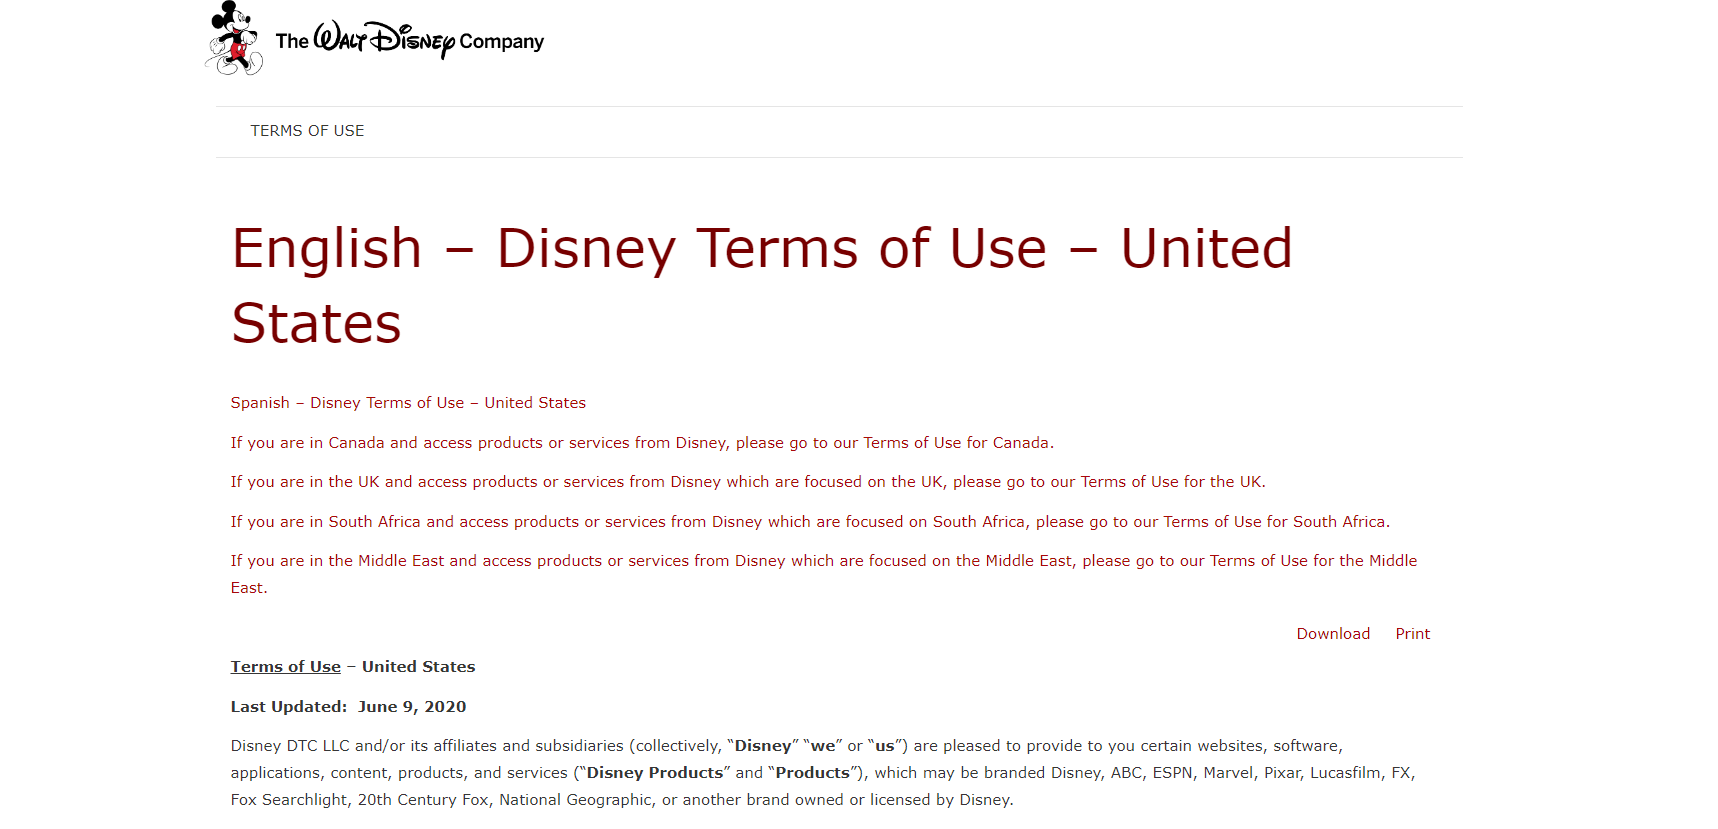 Disney's Terms and conditions